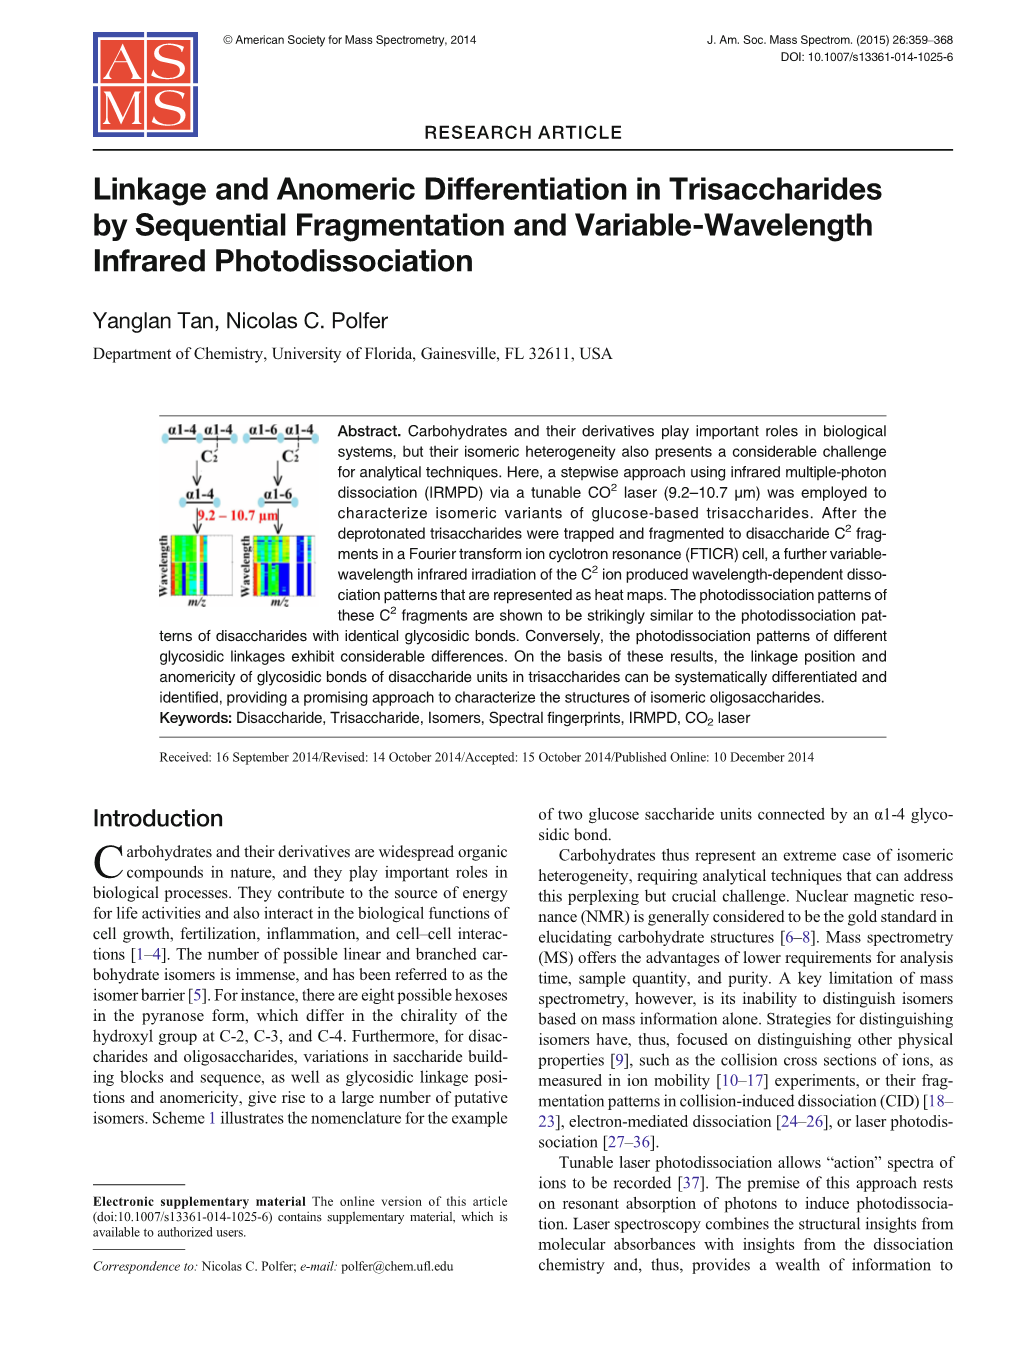 Linkage and Anomeric Differentiation in Trisaccharides by Sequential Fragmentation and Variable-Wavelength Infrared Photodissociation